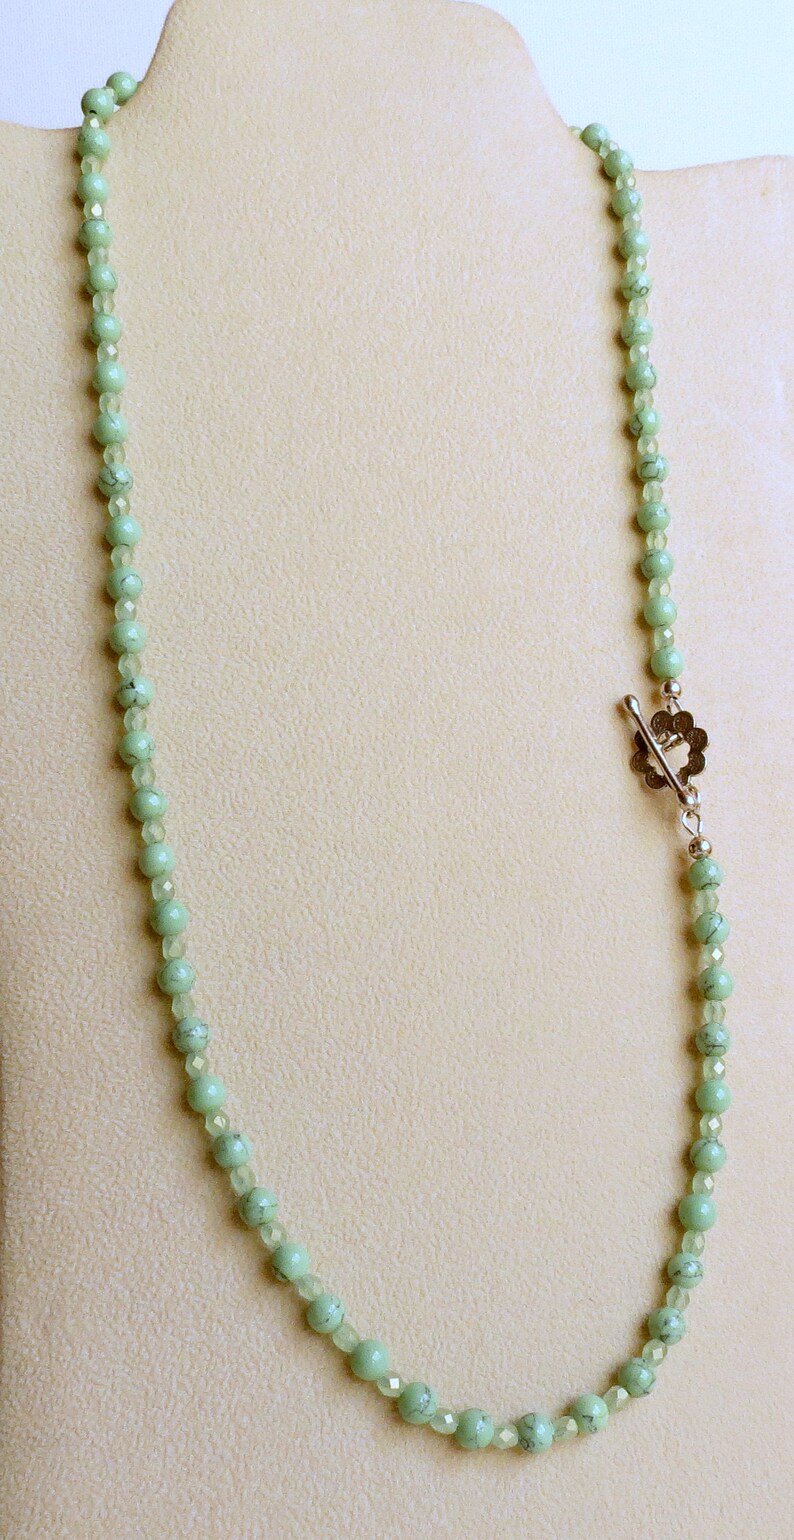 Czech Glass Beads and Sterling Silver Clasp Hand Beaded Necklace in Soft Green Magnesite Great Gift Ladies Accessory Women/'s Jewelry